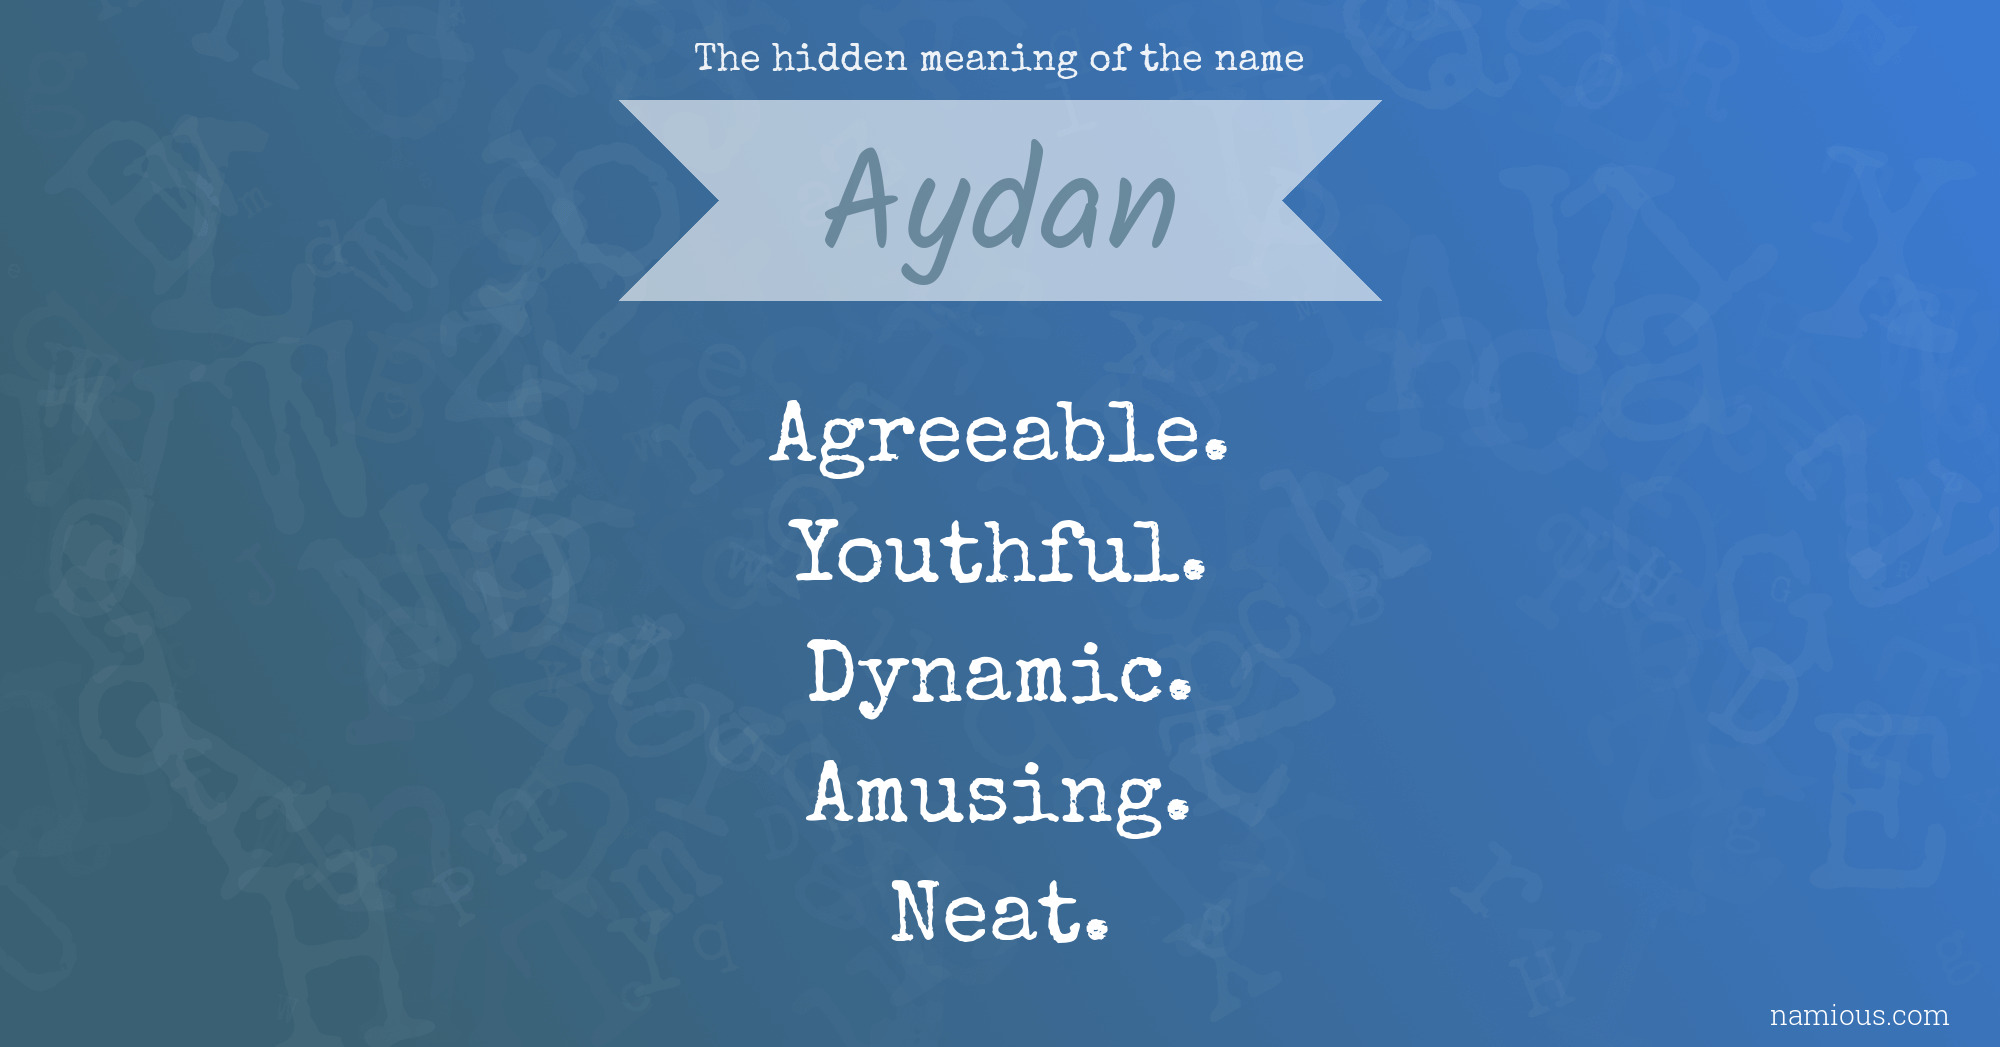 The hidden meaning of the name Aydan